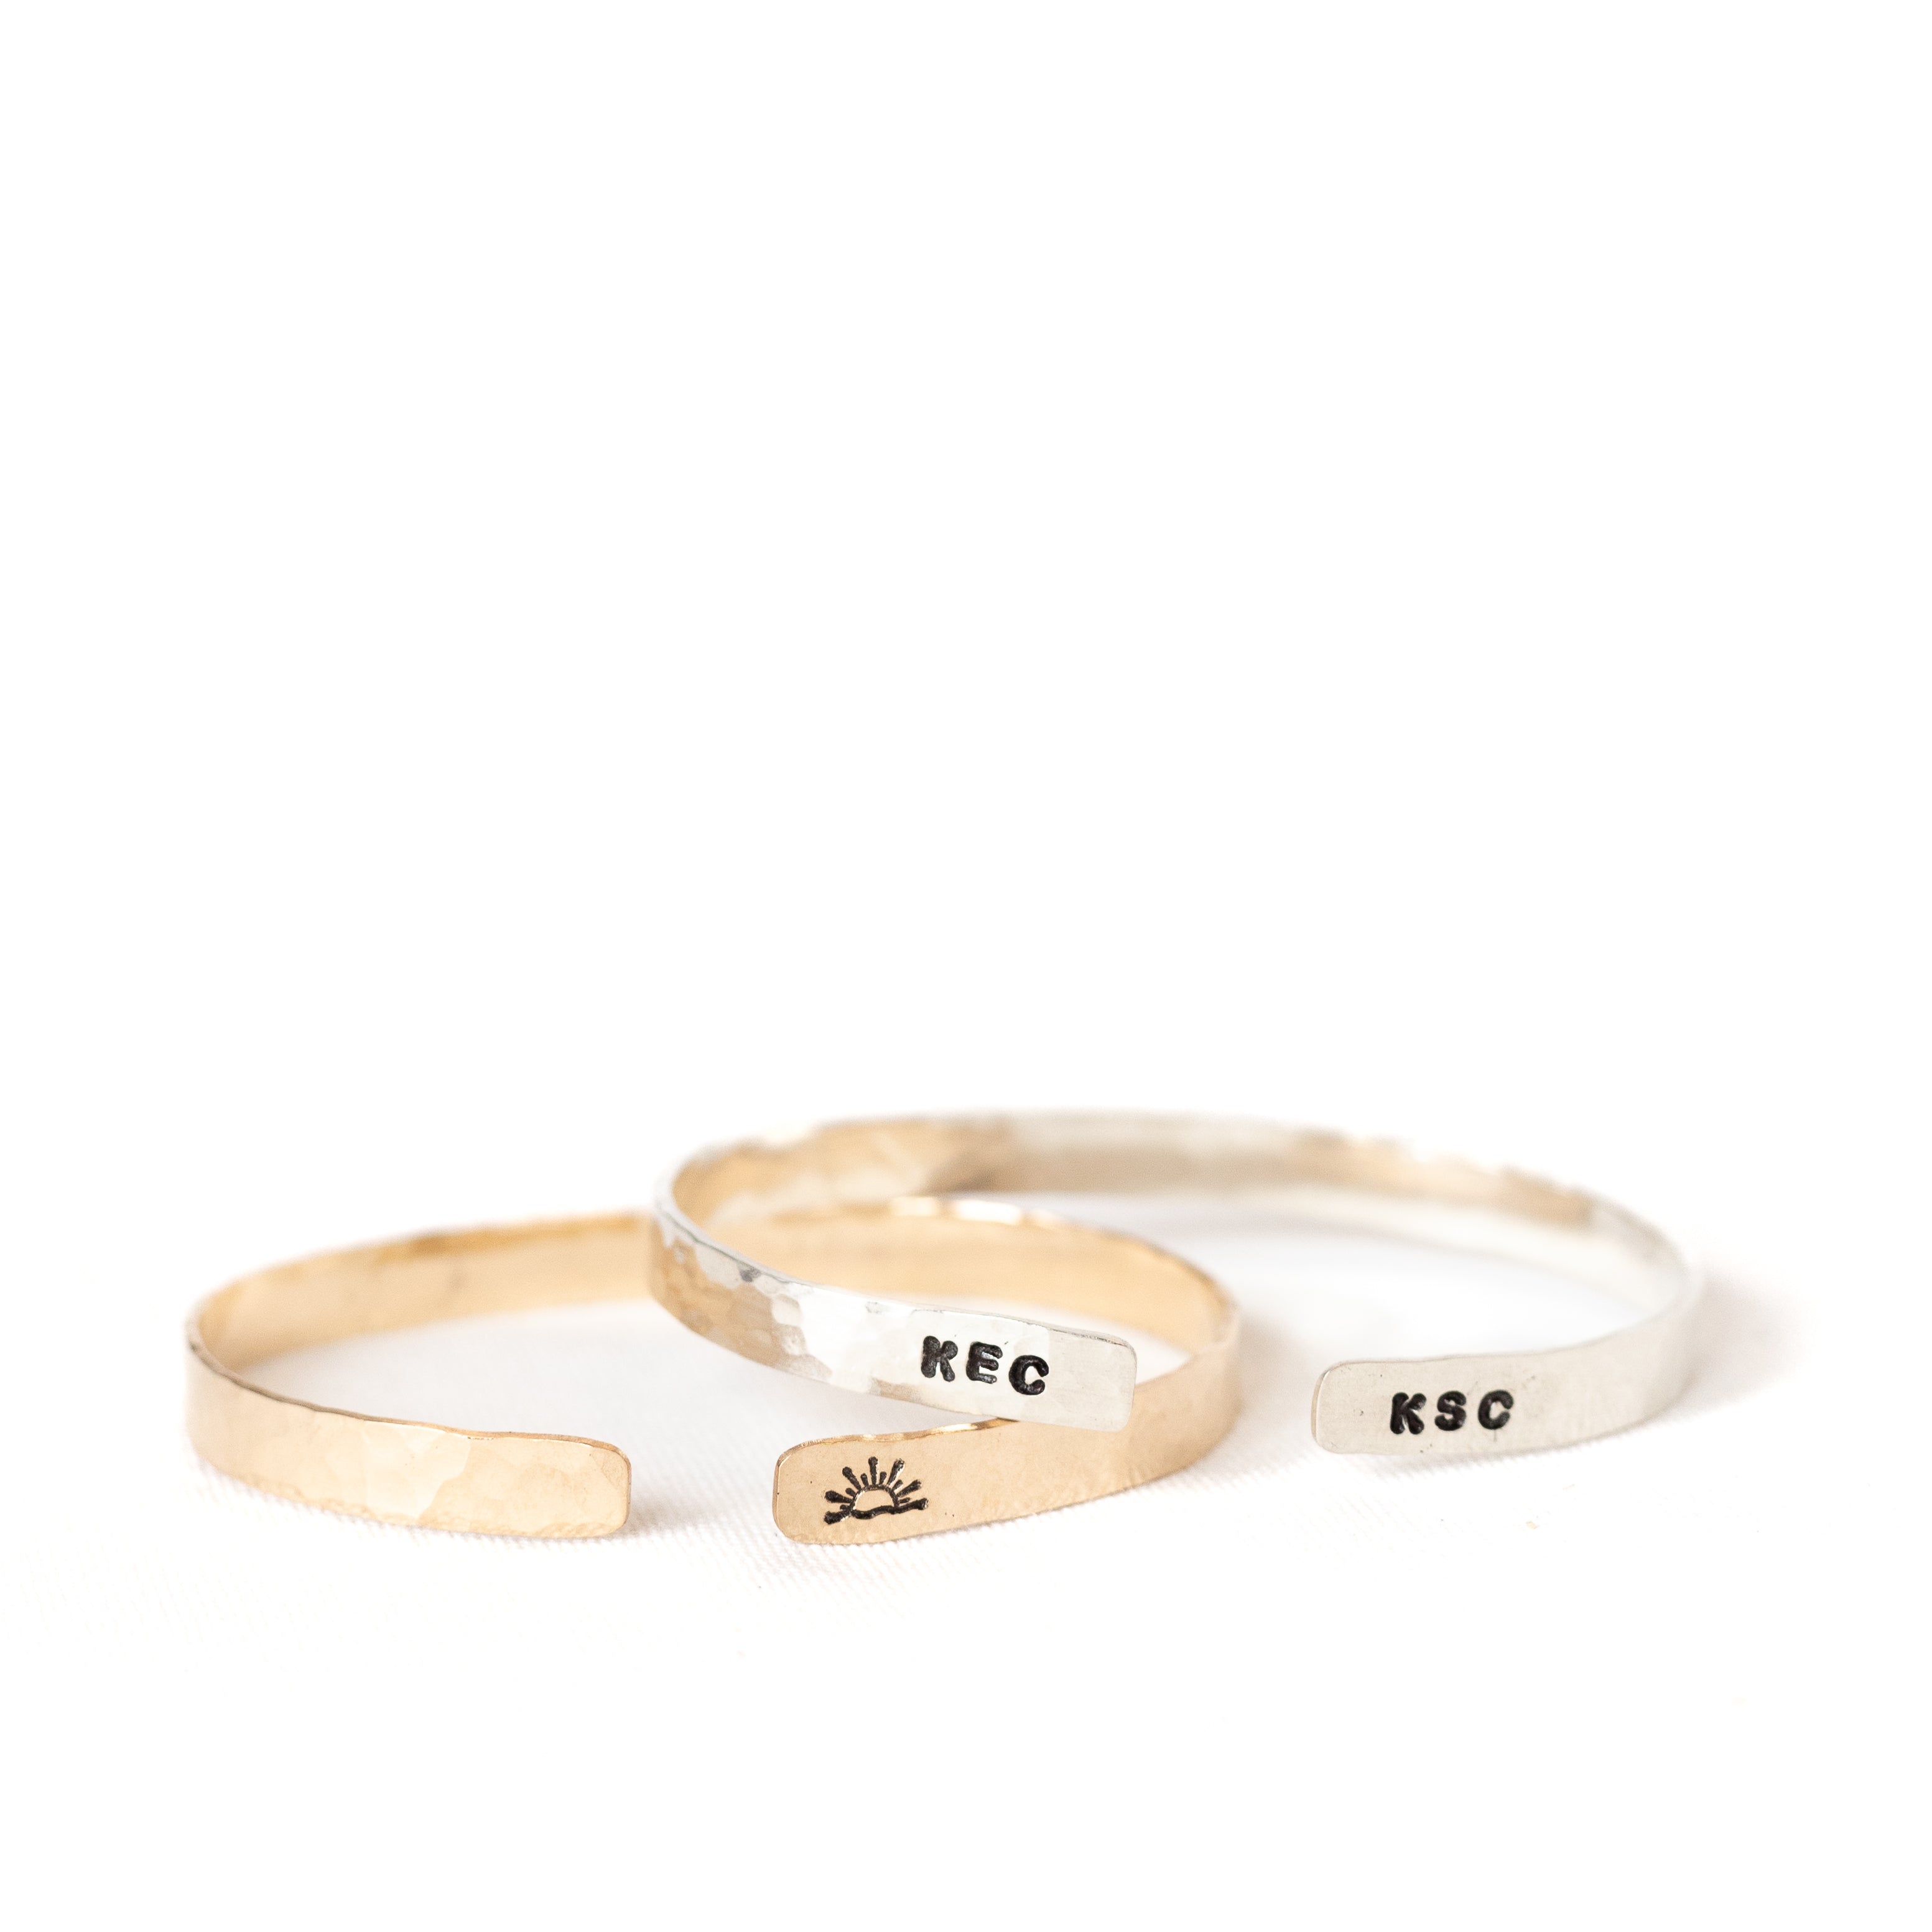 Two cuffs with symbols and initials stamped on the outside edge of them. The left one is gold with a sunset stamped and the right one is silver with initials stamped onto it. 